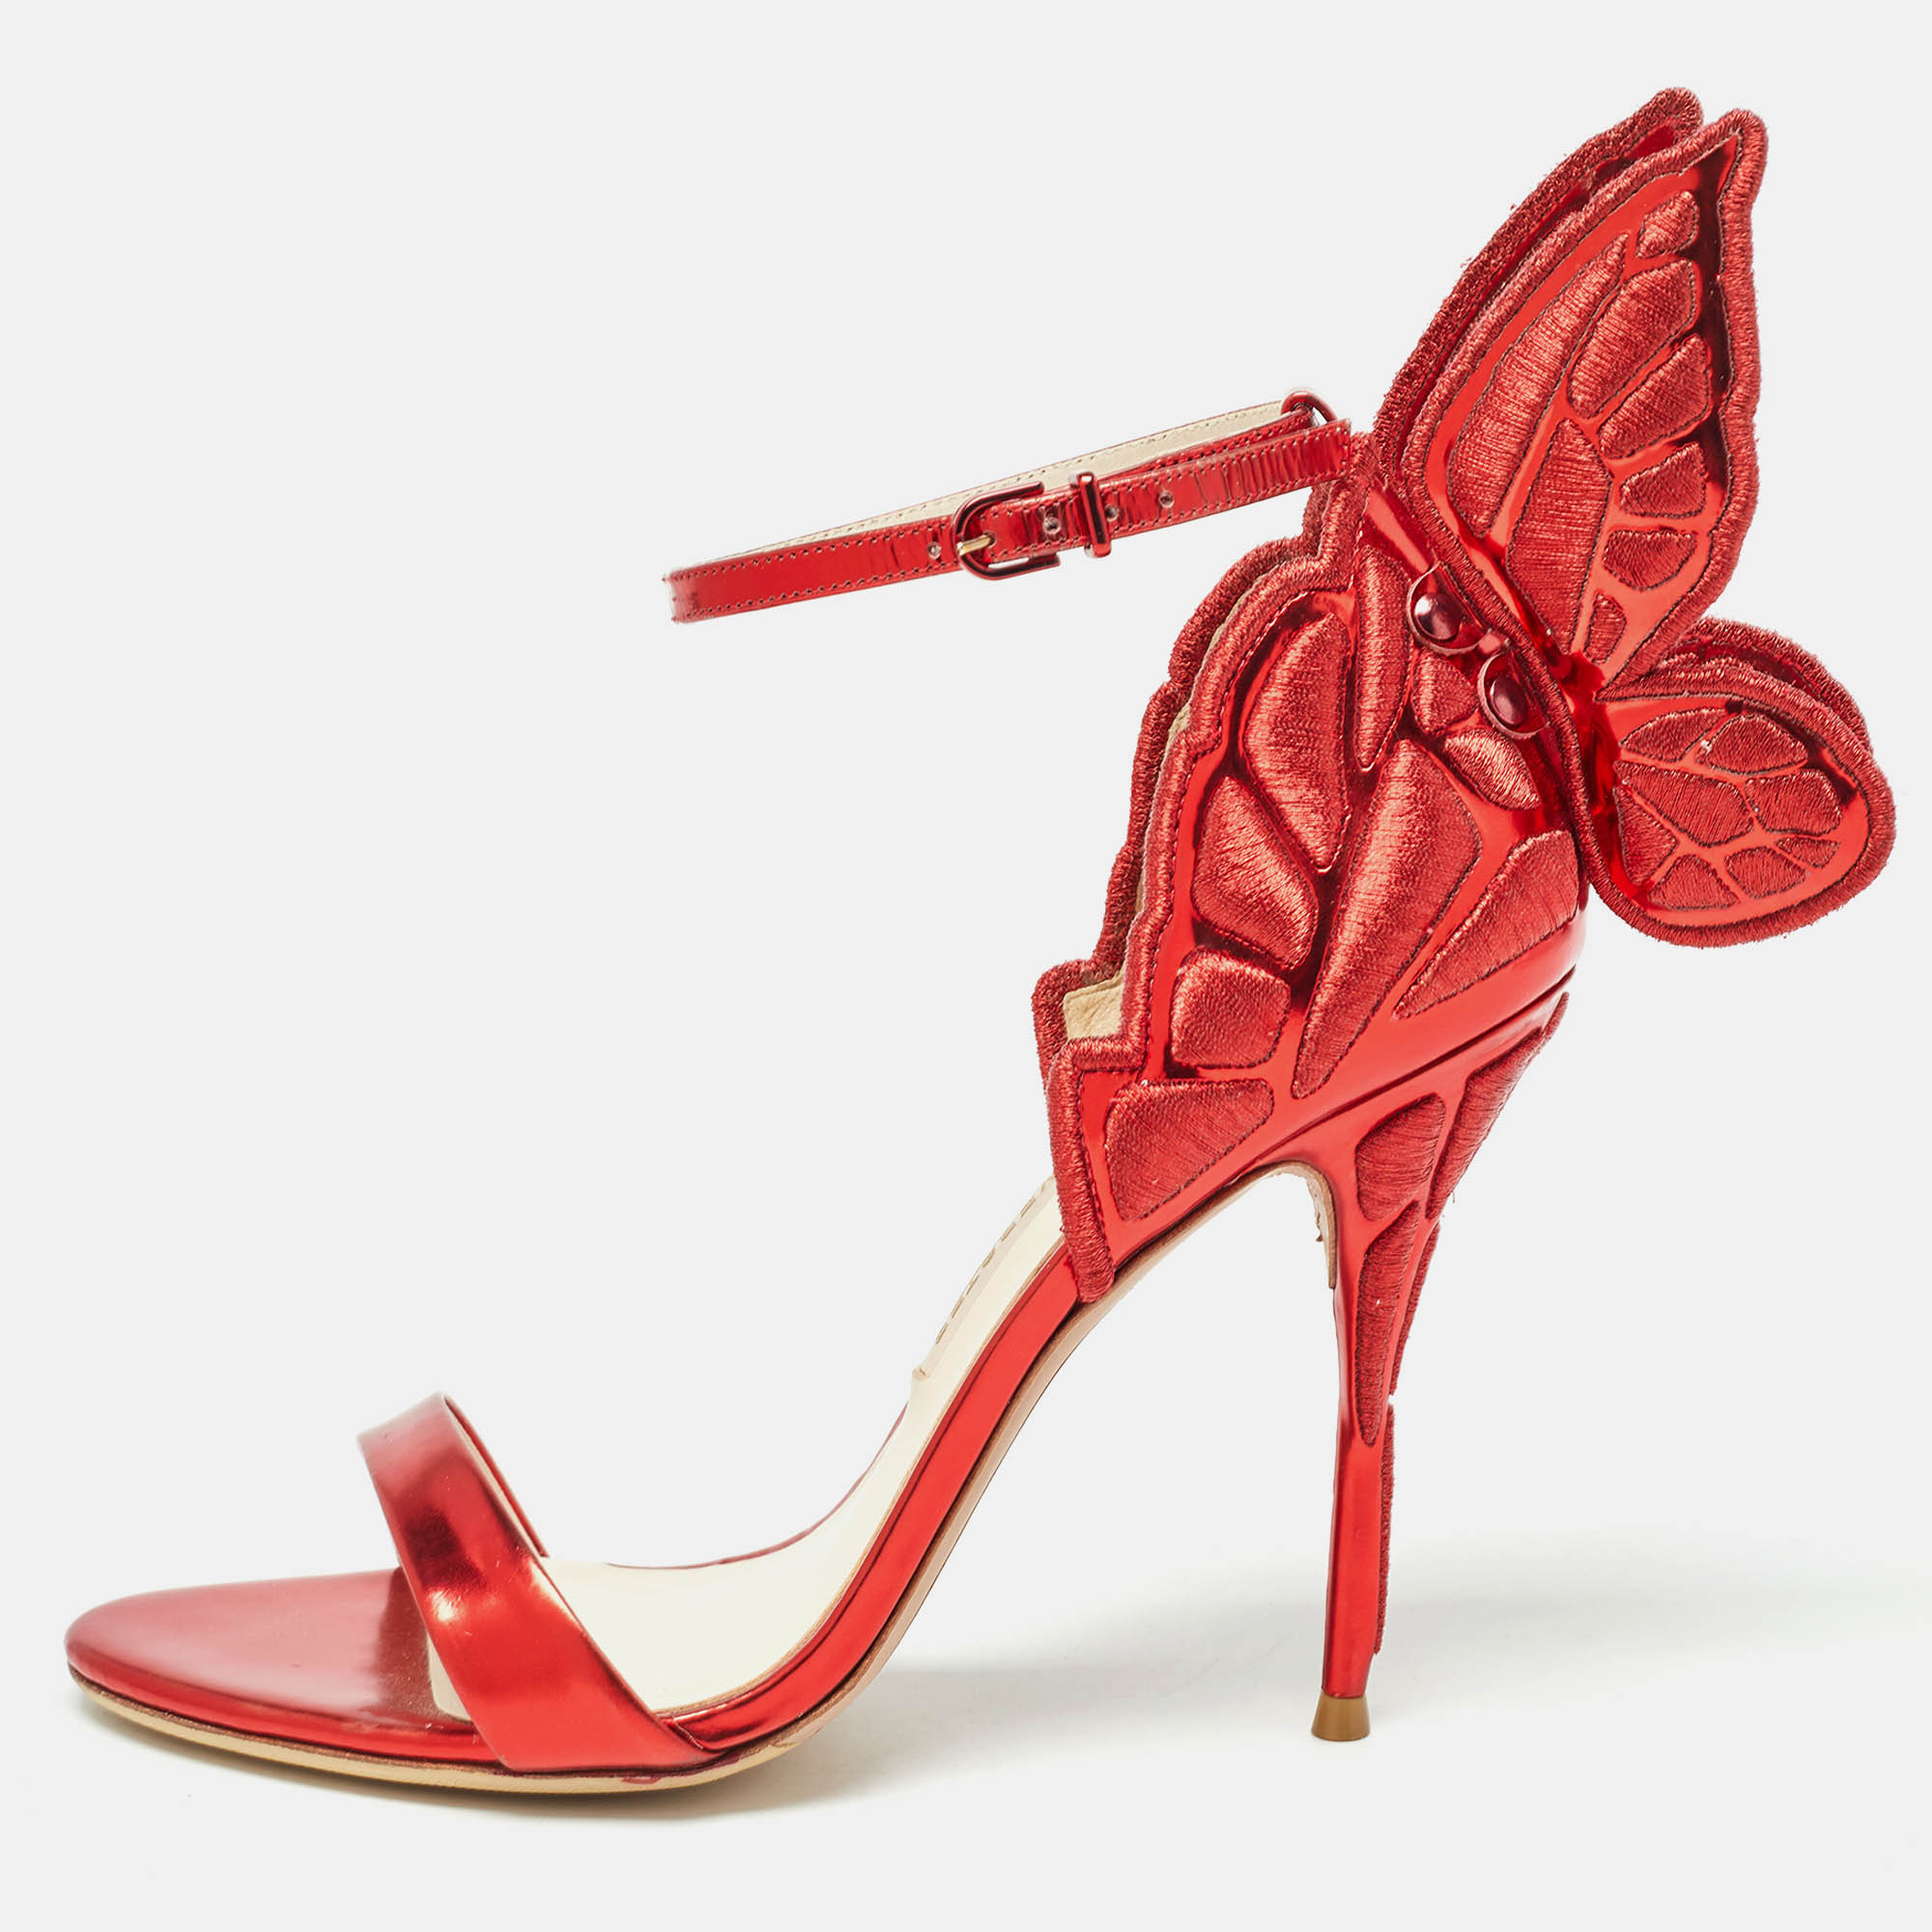 Sophia webster metallic red leather chiara butterfly ankle strap sandals size 39